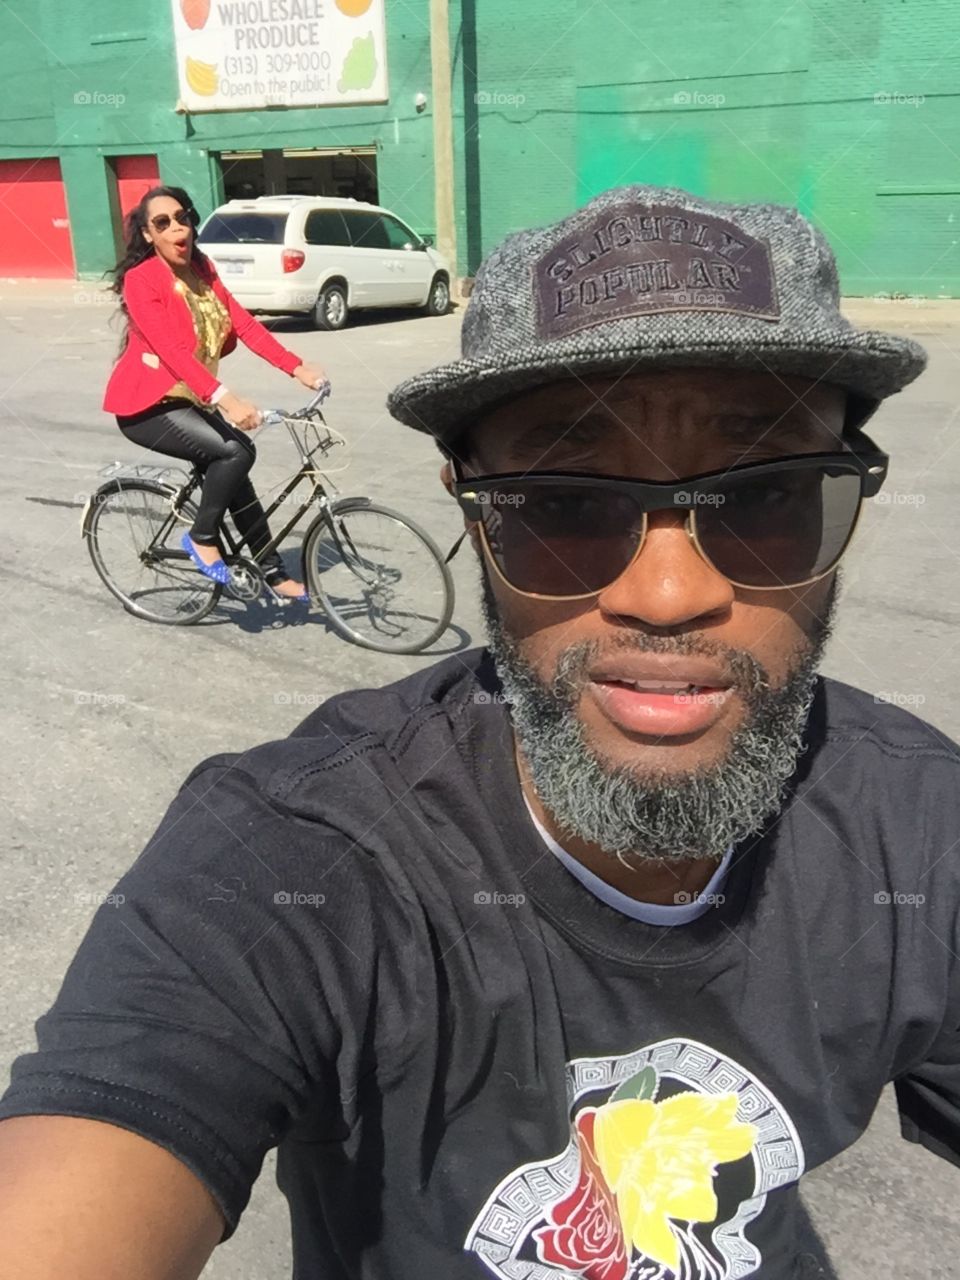 Spring Day in Detroit. My wife and I riding bikes in Eastern Market